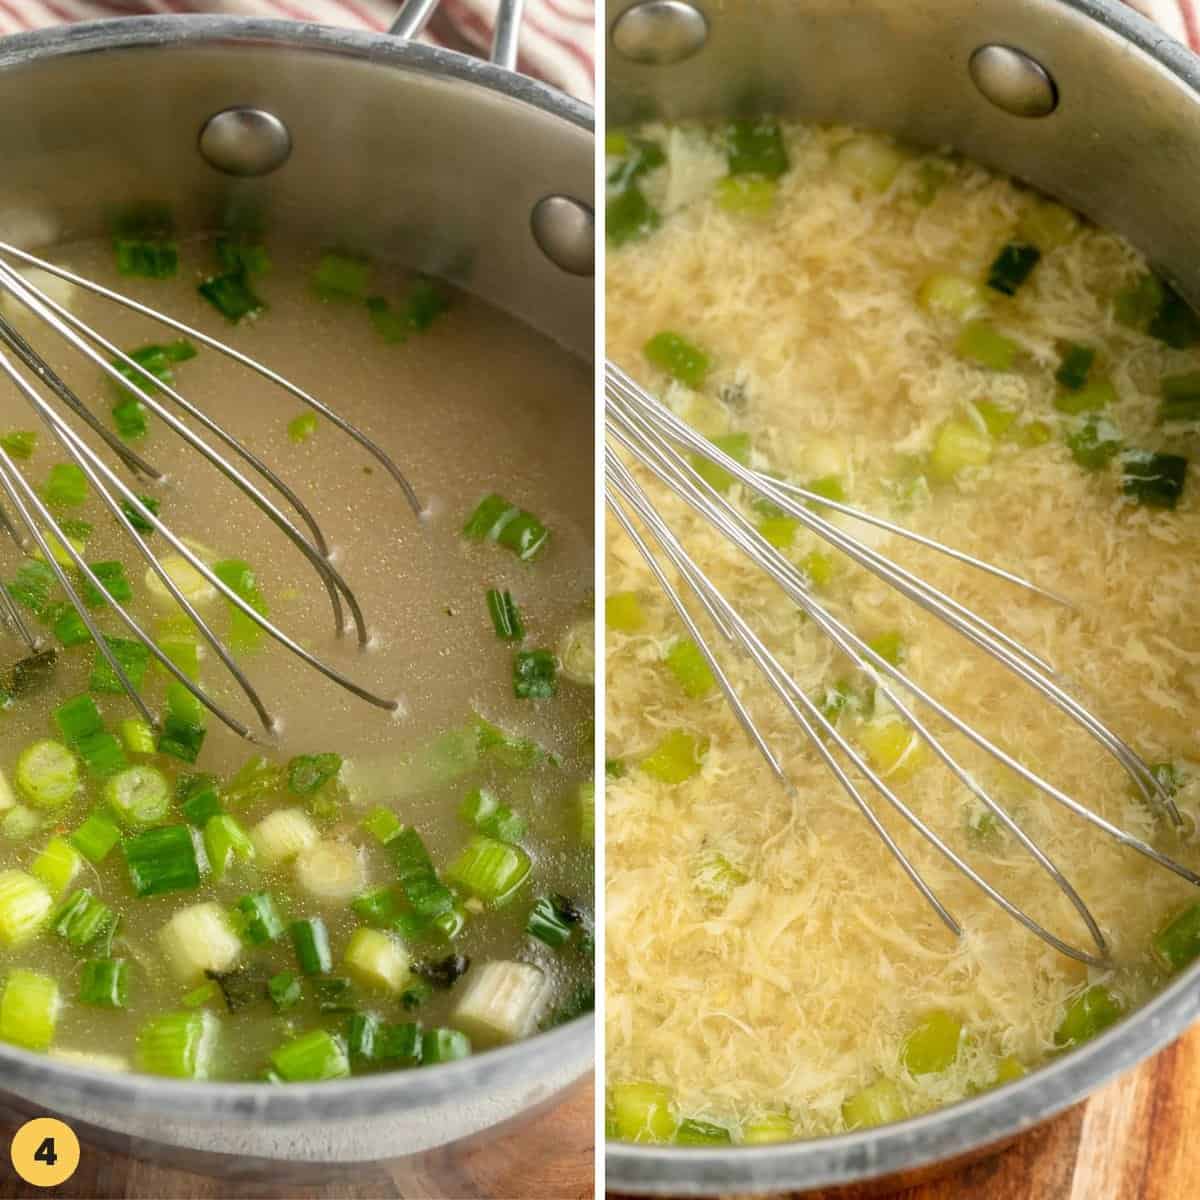 two images showing egg drop soup before and after adding the eggs.